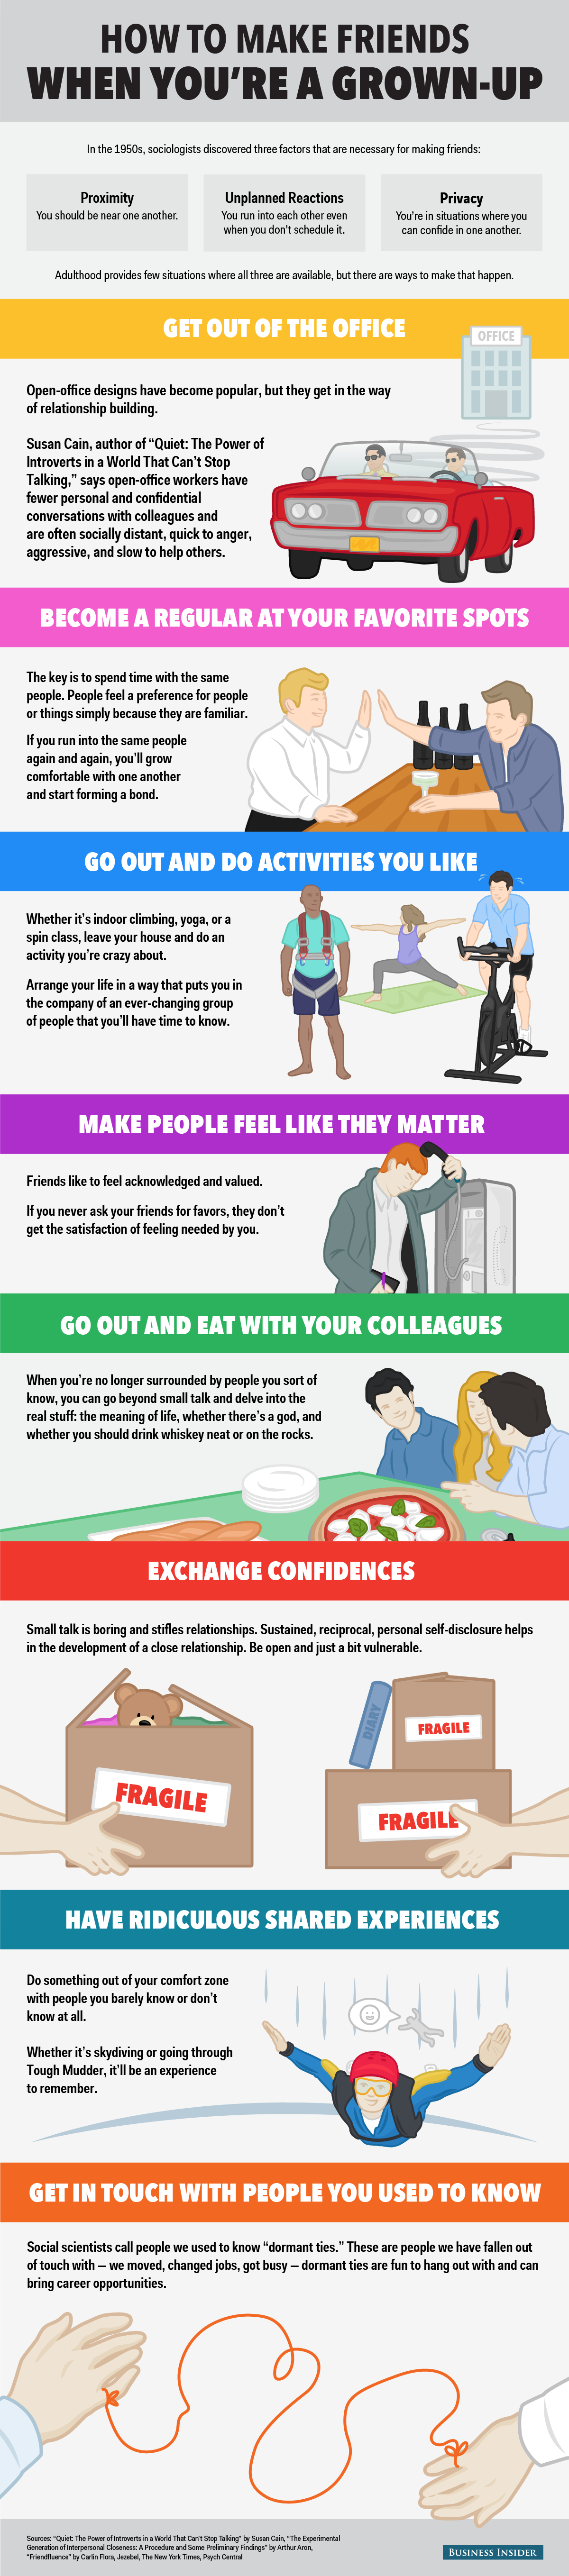 how-to-make-friends-infographic